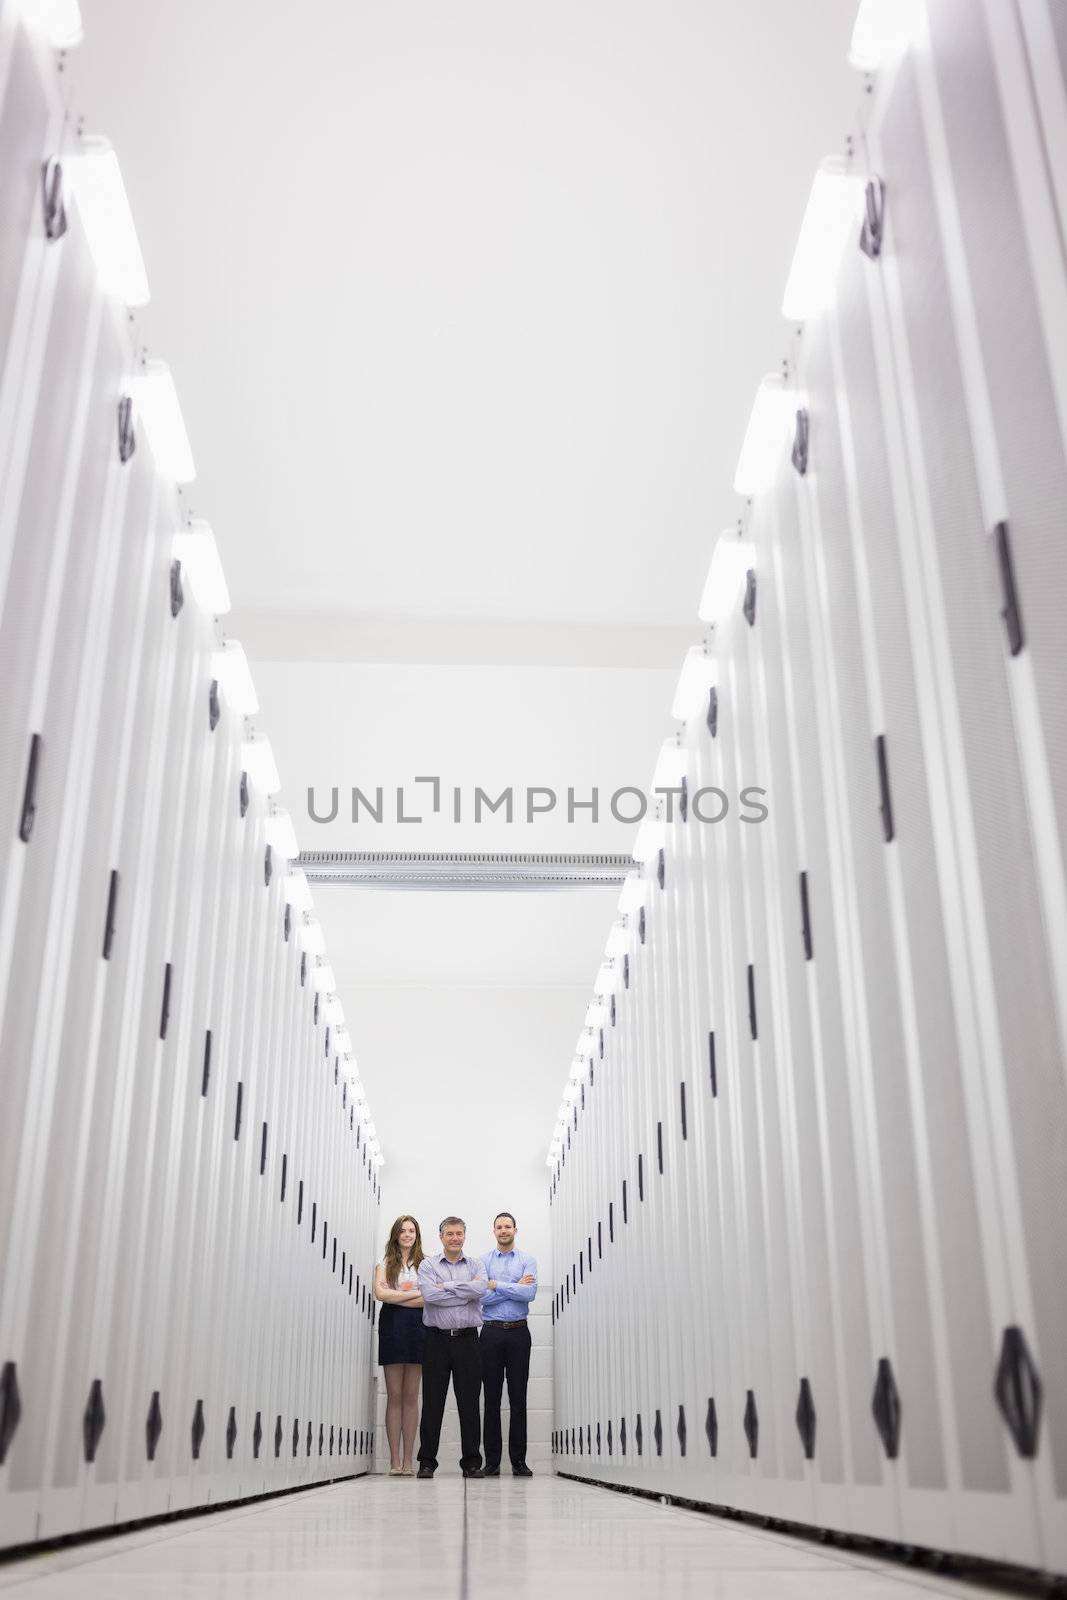 Technicians standing at end of hallway by Wavebreakmedia